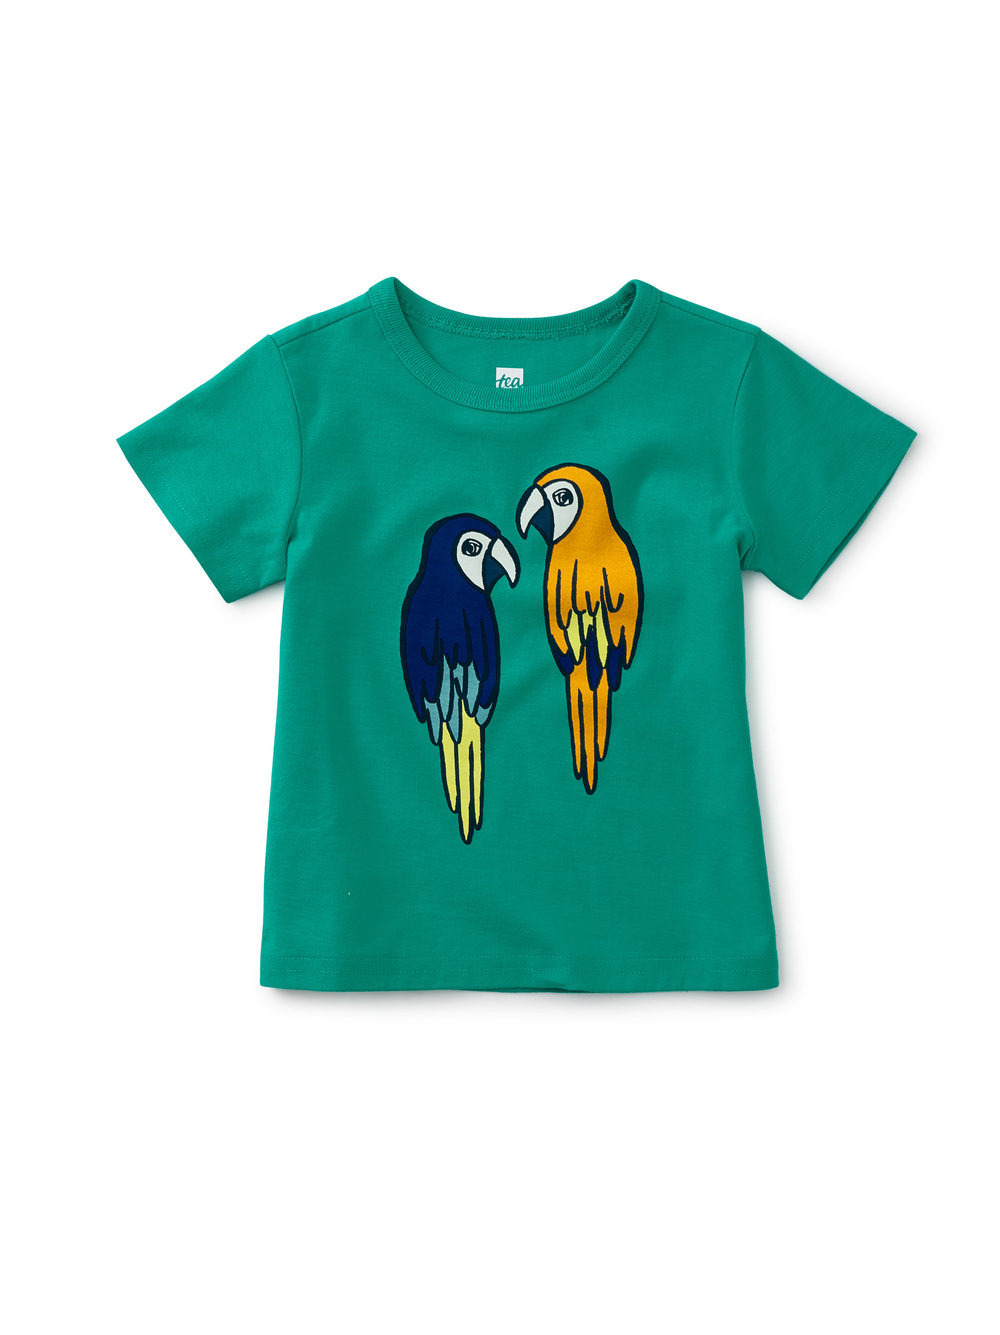 Parrot Pals Baby Graphic Tee